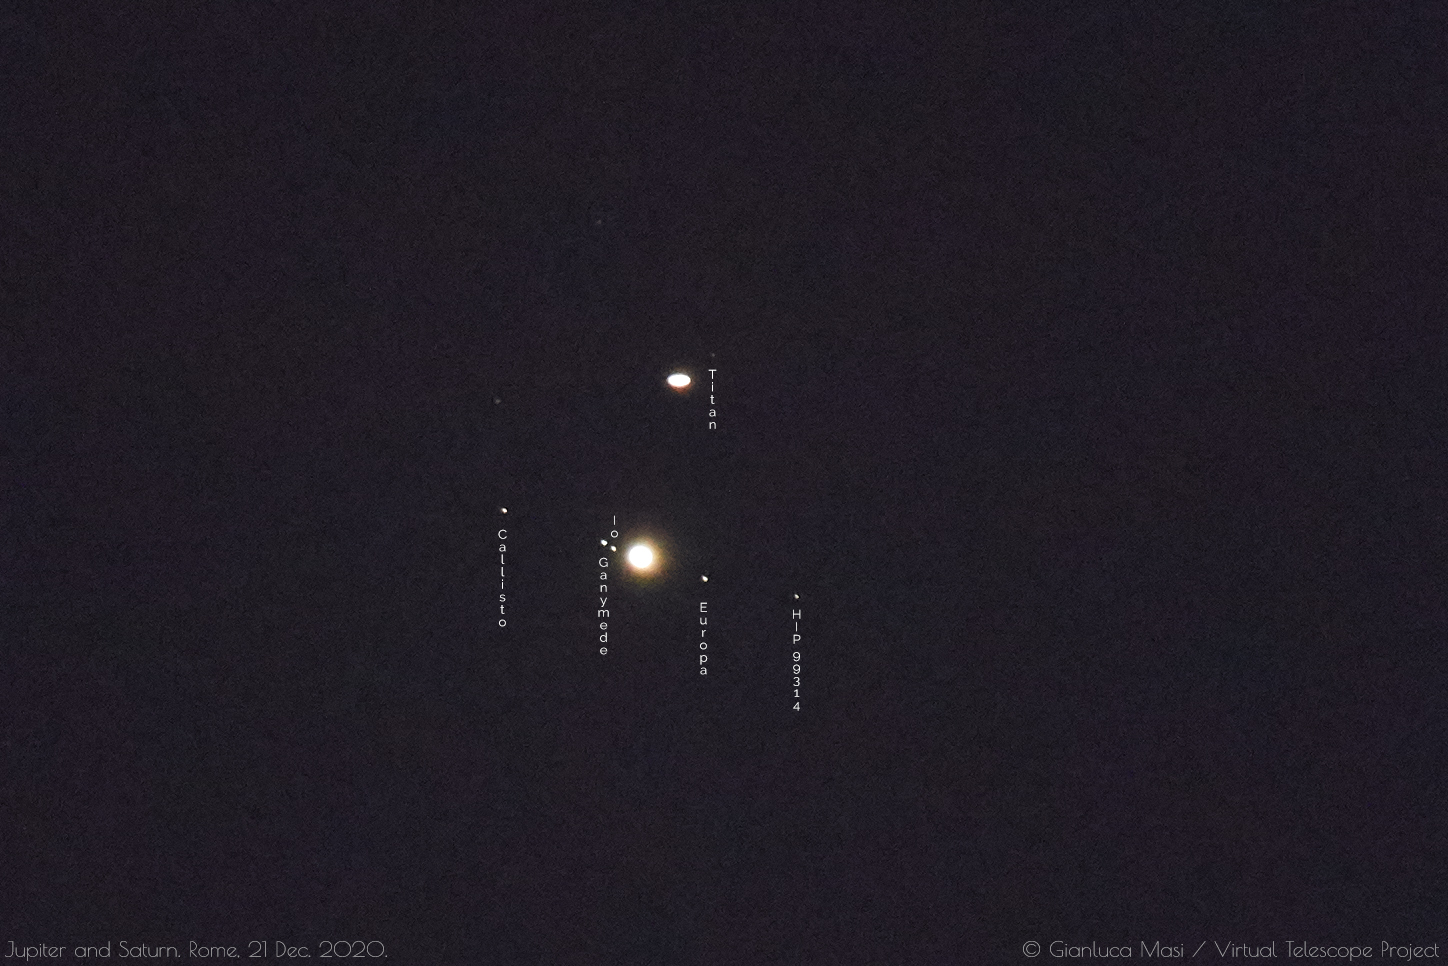 Jupiter and Saturn show their largest moons. 21 Dec. 2021.